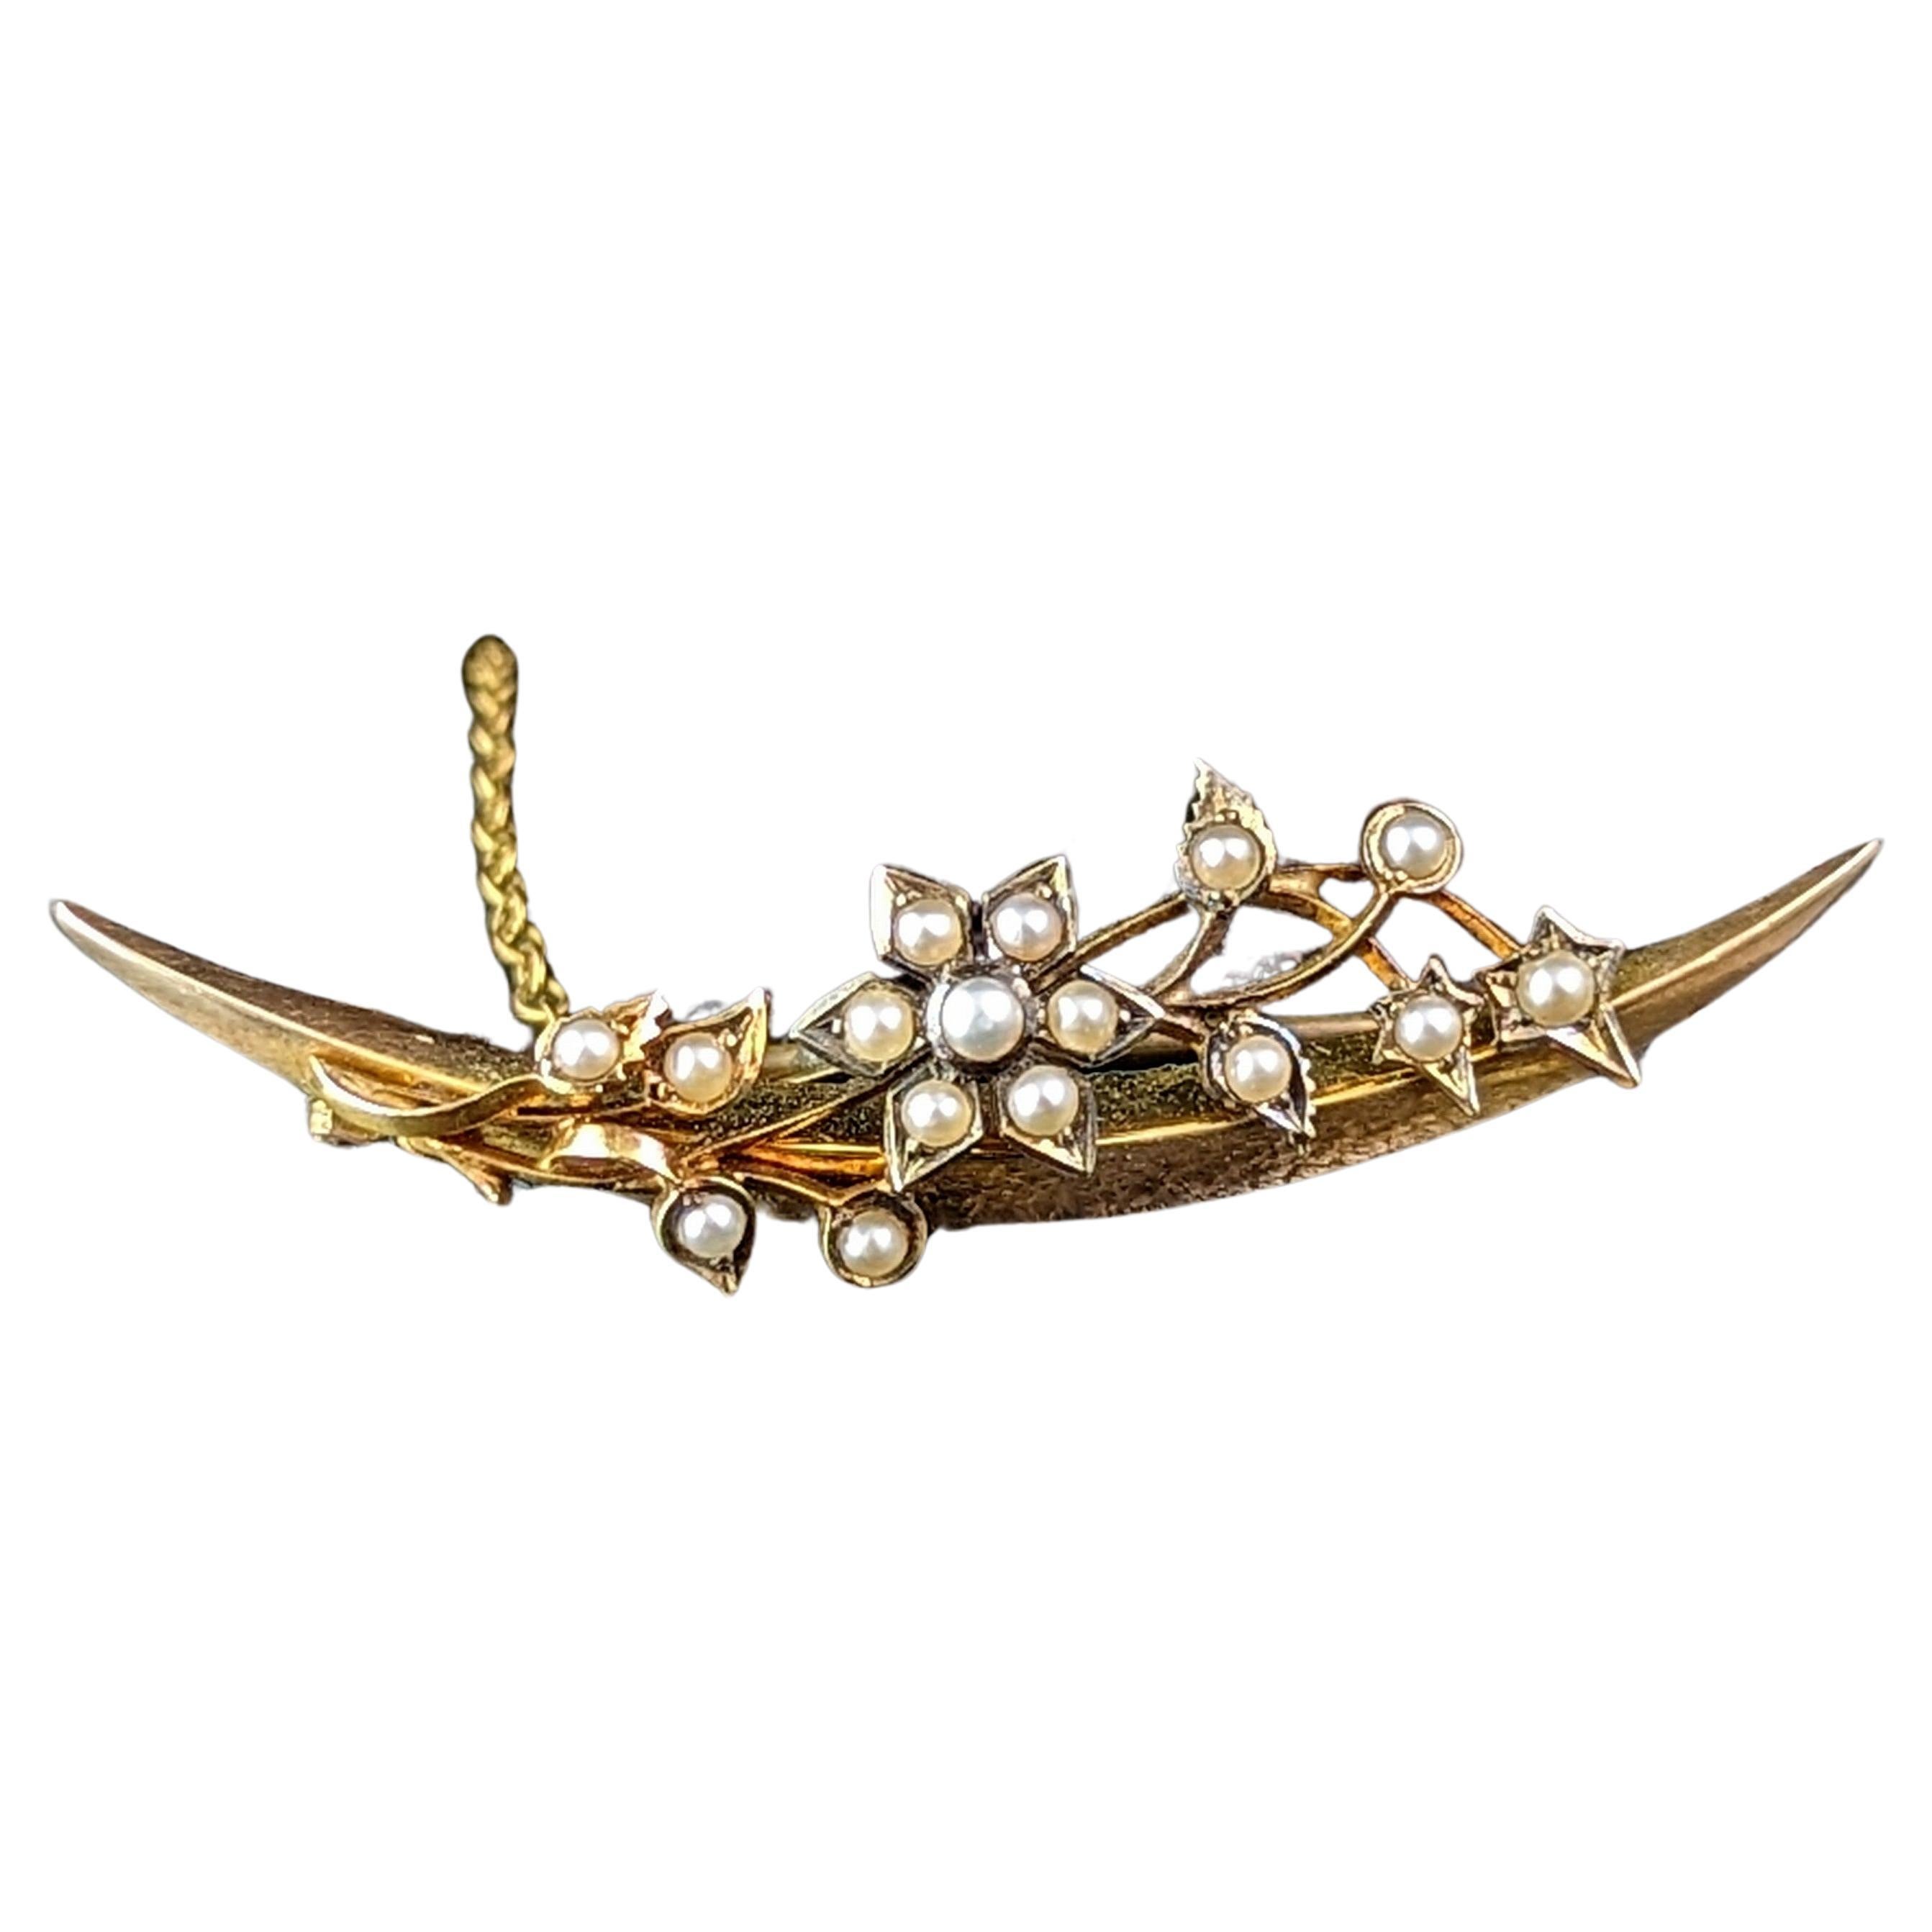 Antique 15k gold Crescent moon and flower brooch, Pearl, Victorian 